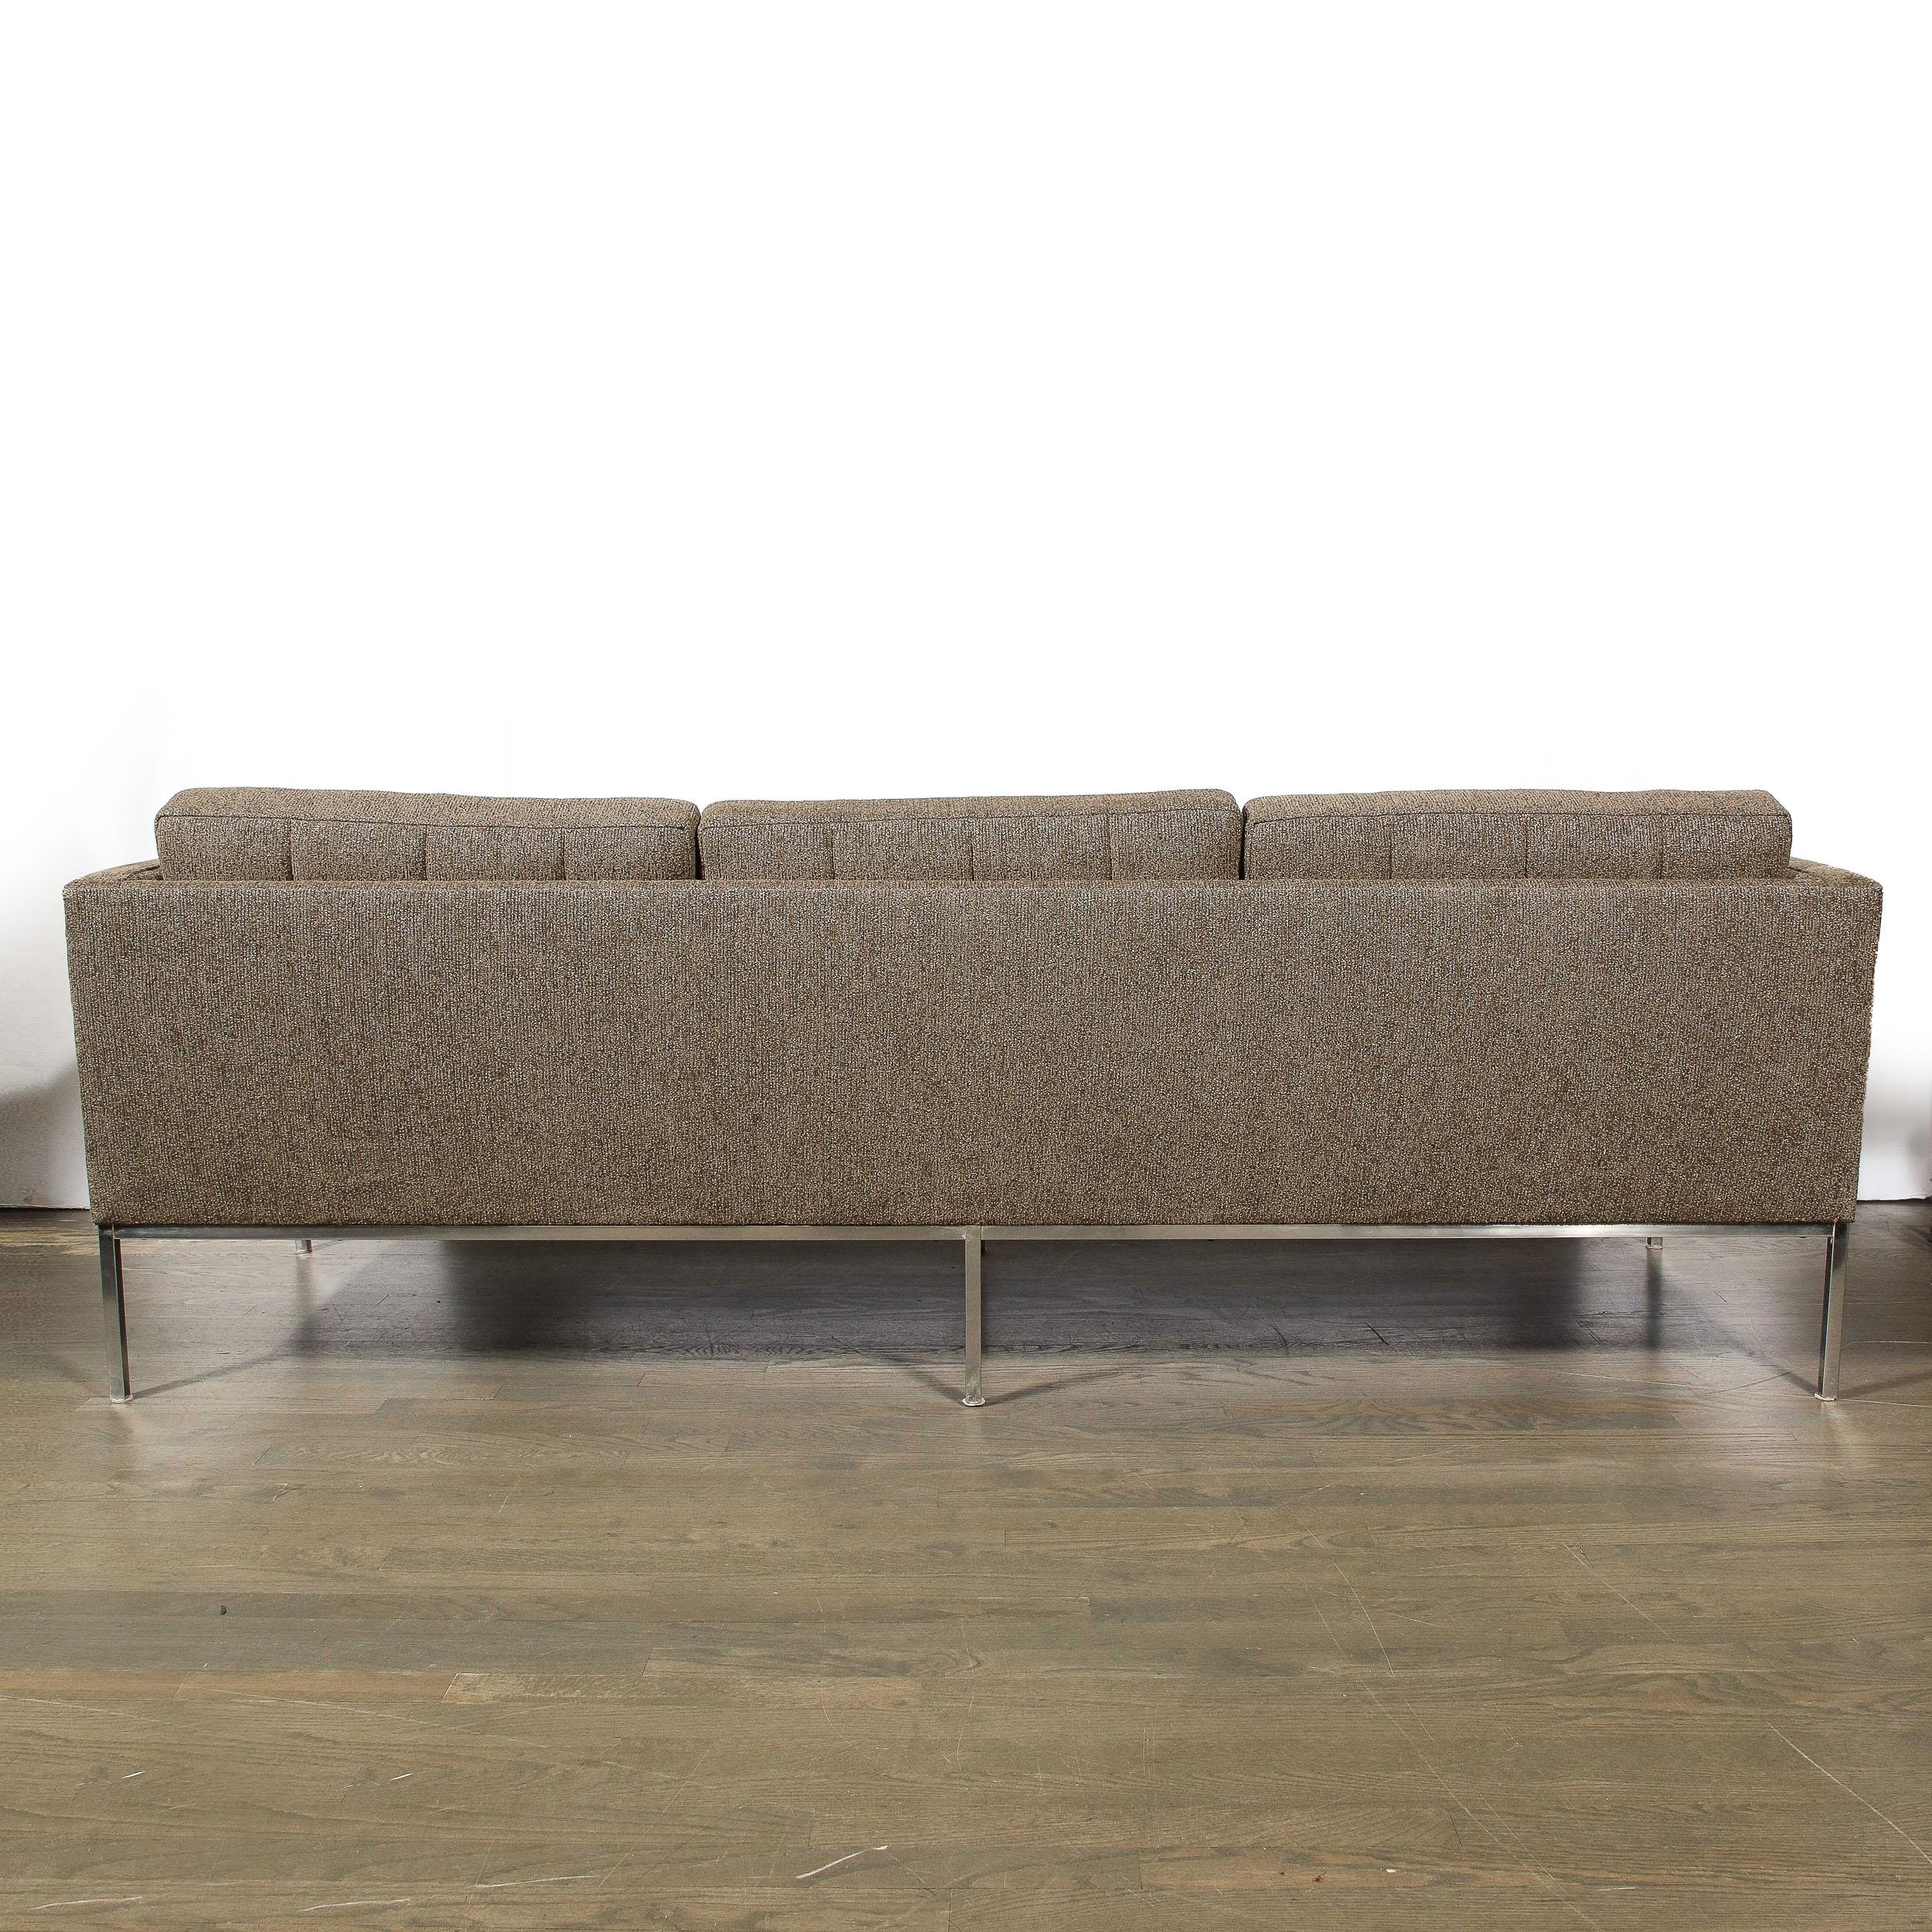 Modernist Biscuit Tufted 'Relaxed' Sofa in Holly Hunt Fabric by Florence Knoll  For Sale 2